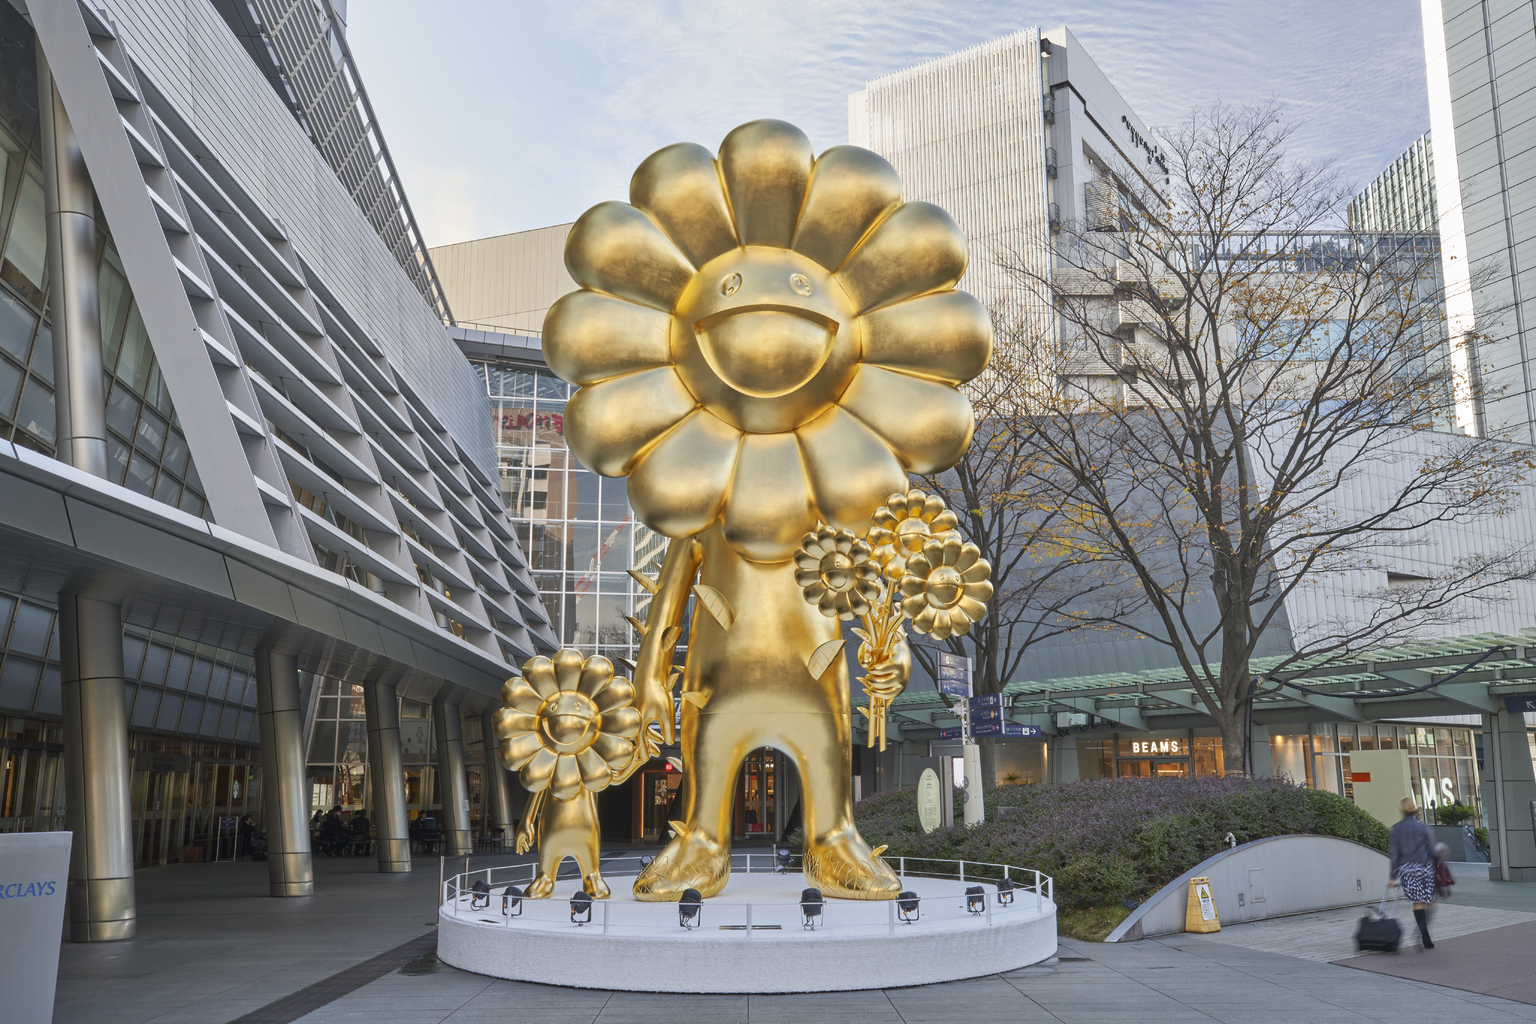 What’s New in Roppongi This Month: July 2021